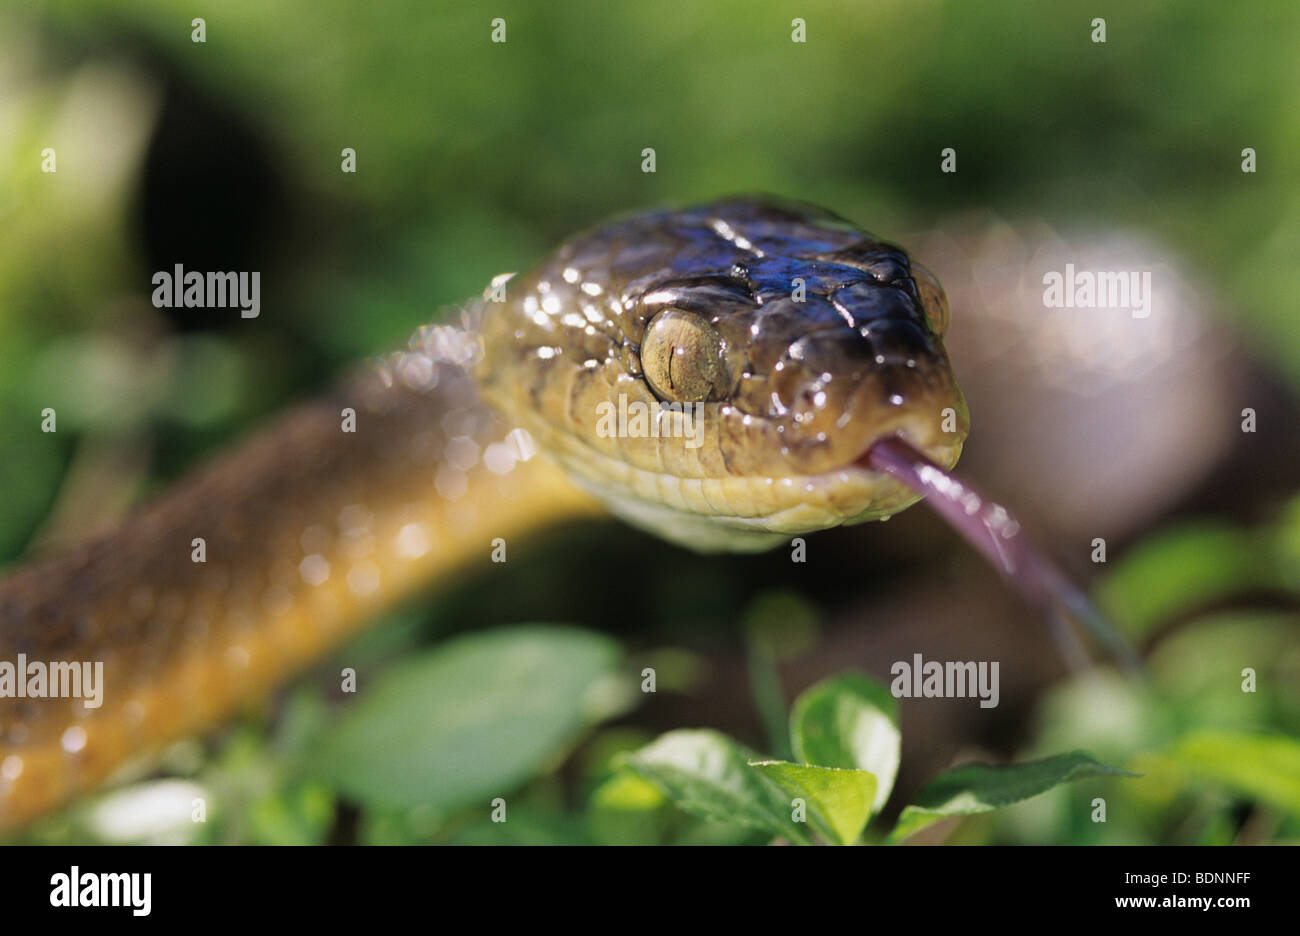 Brown snake, close-up Stock Photo